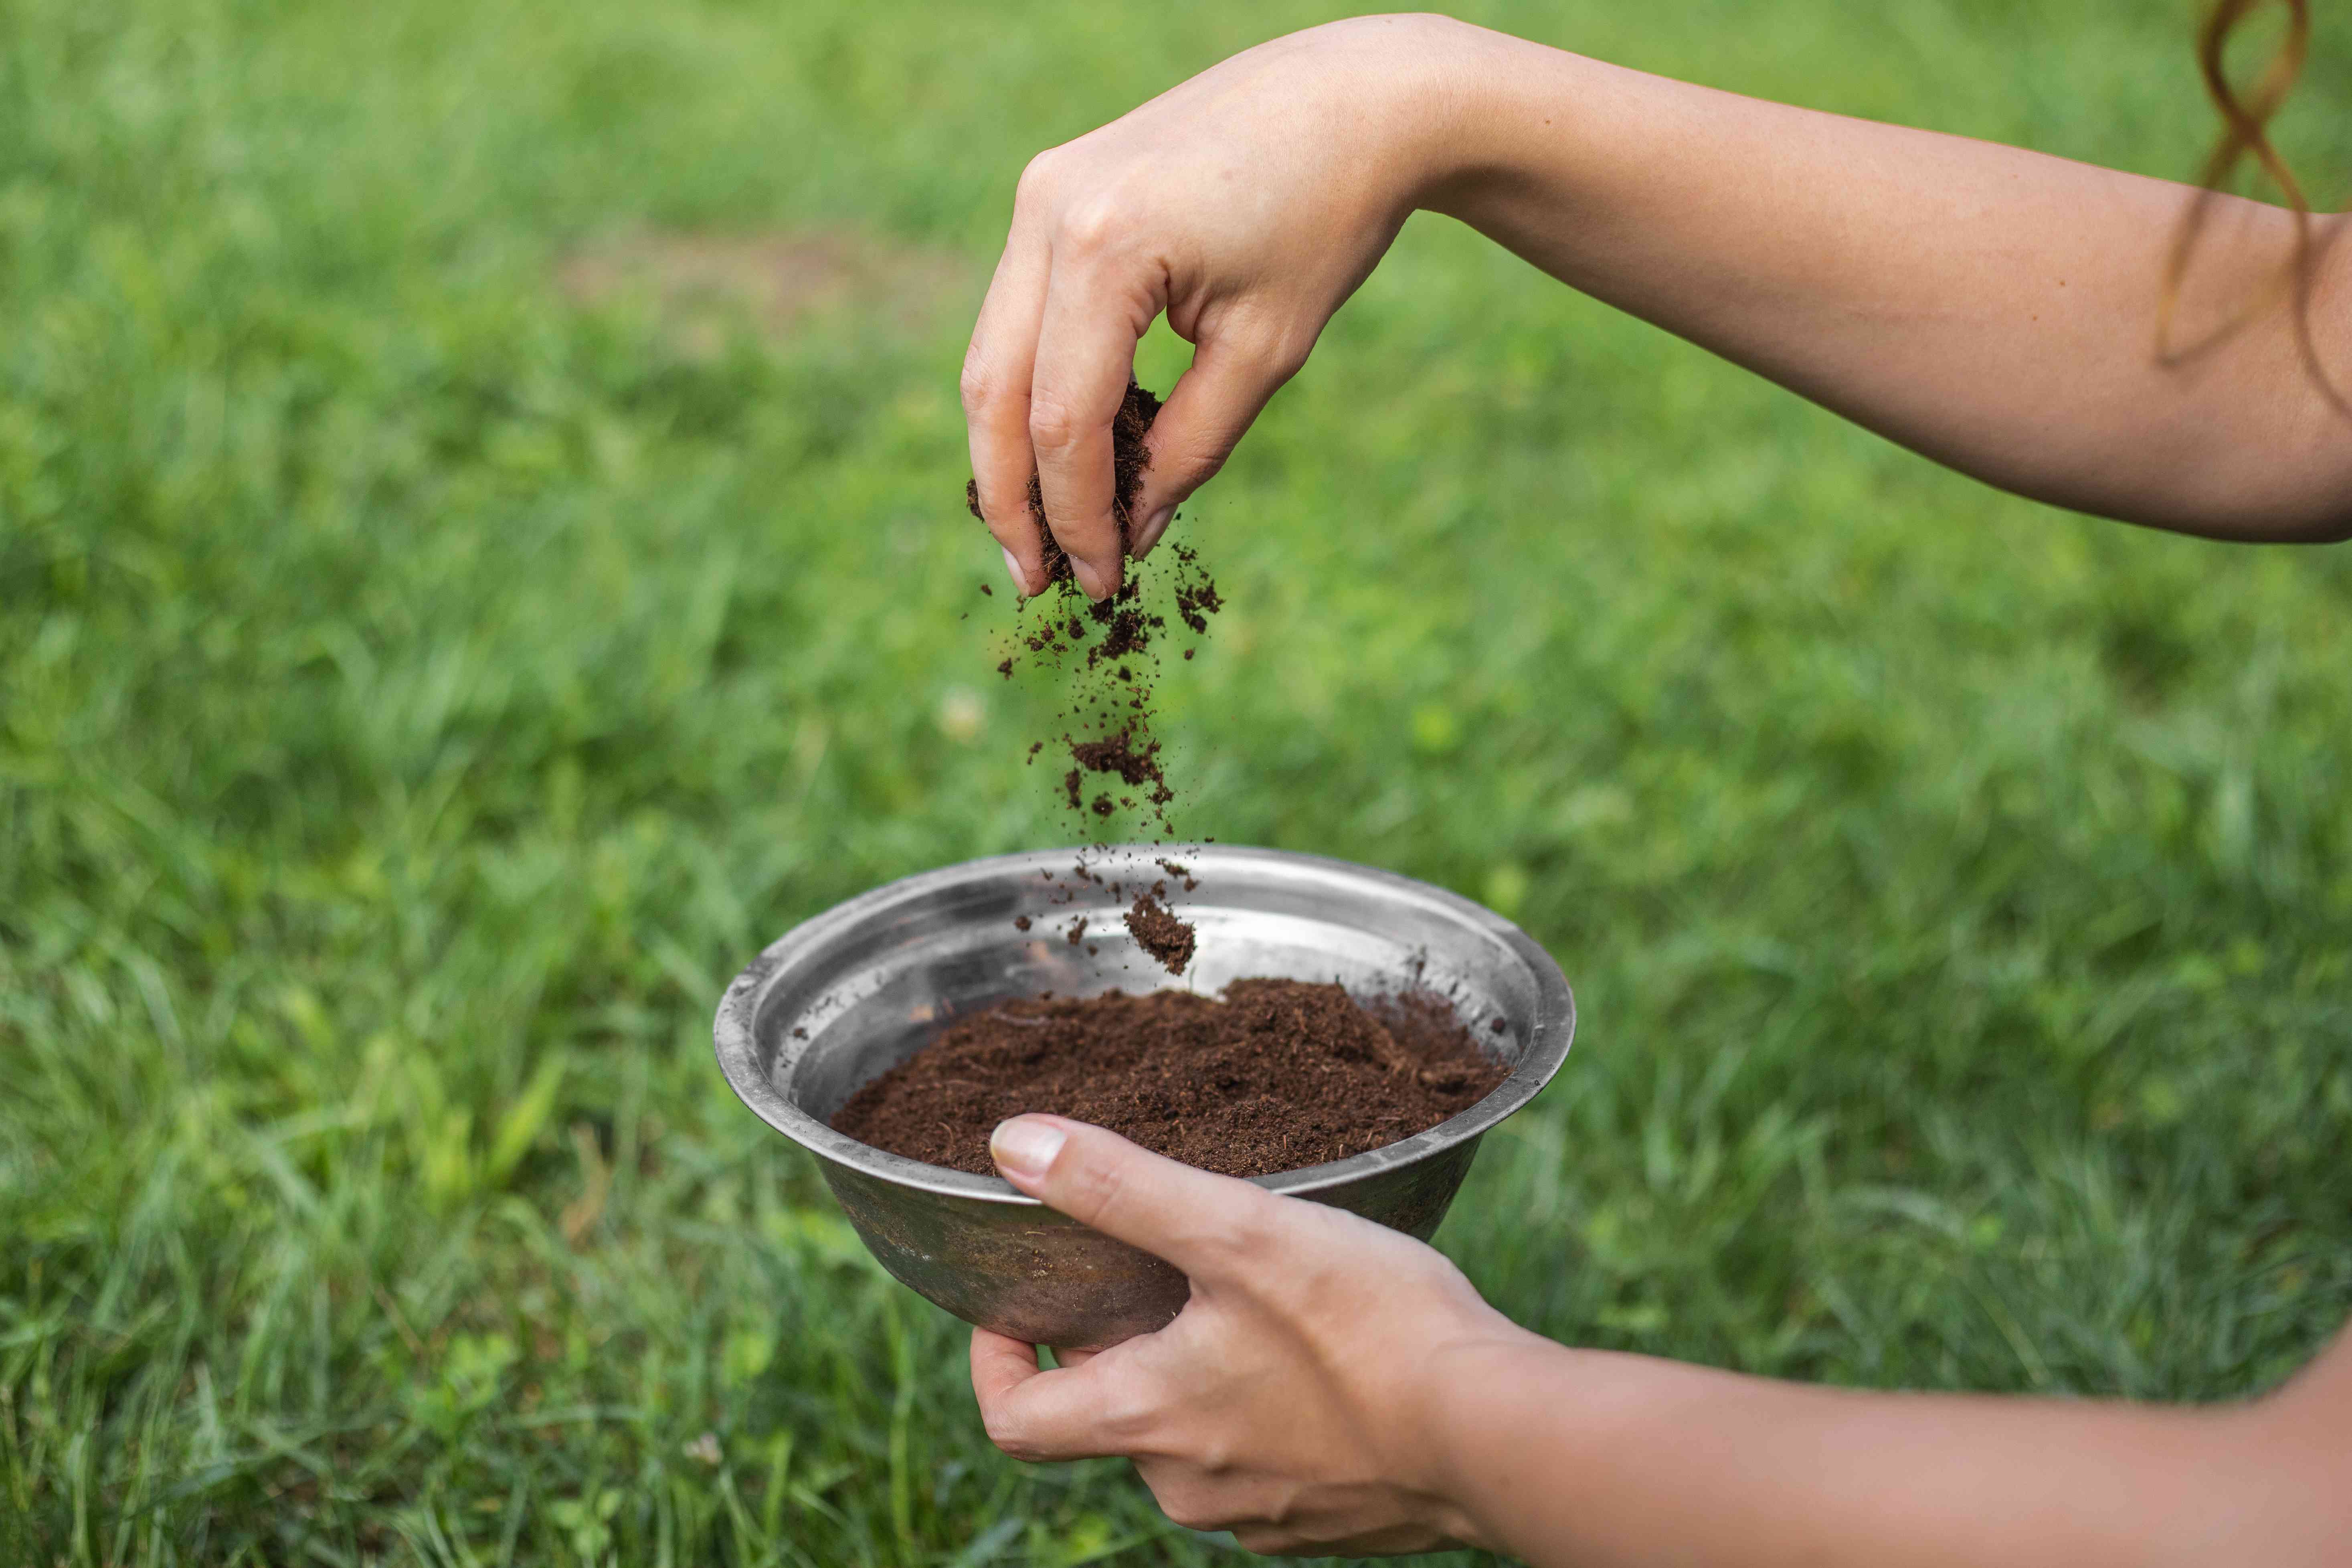 woman holds stainless steel bowl of compost dirt with one hand and sprinkles dirt with other